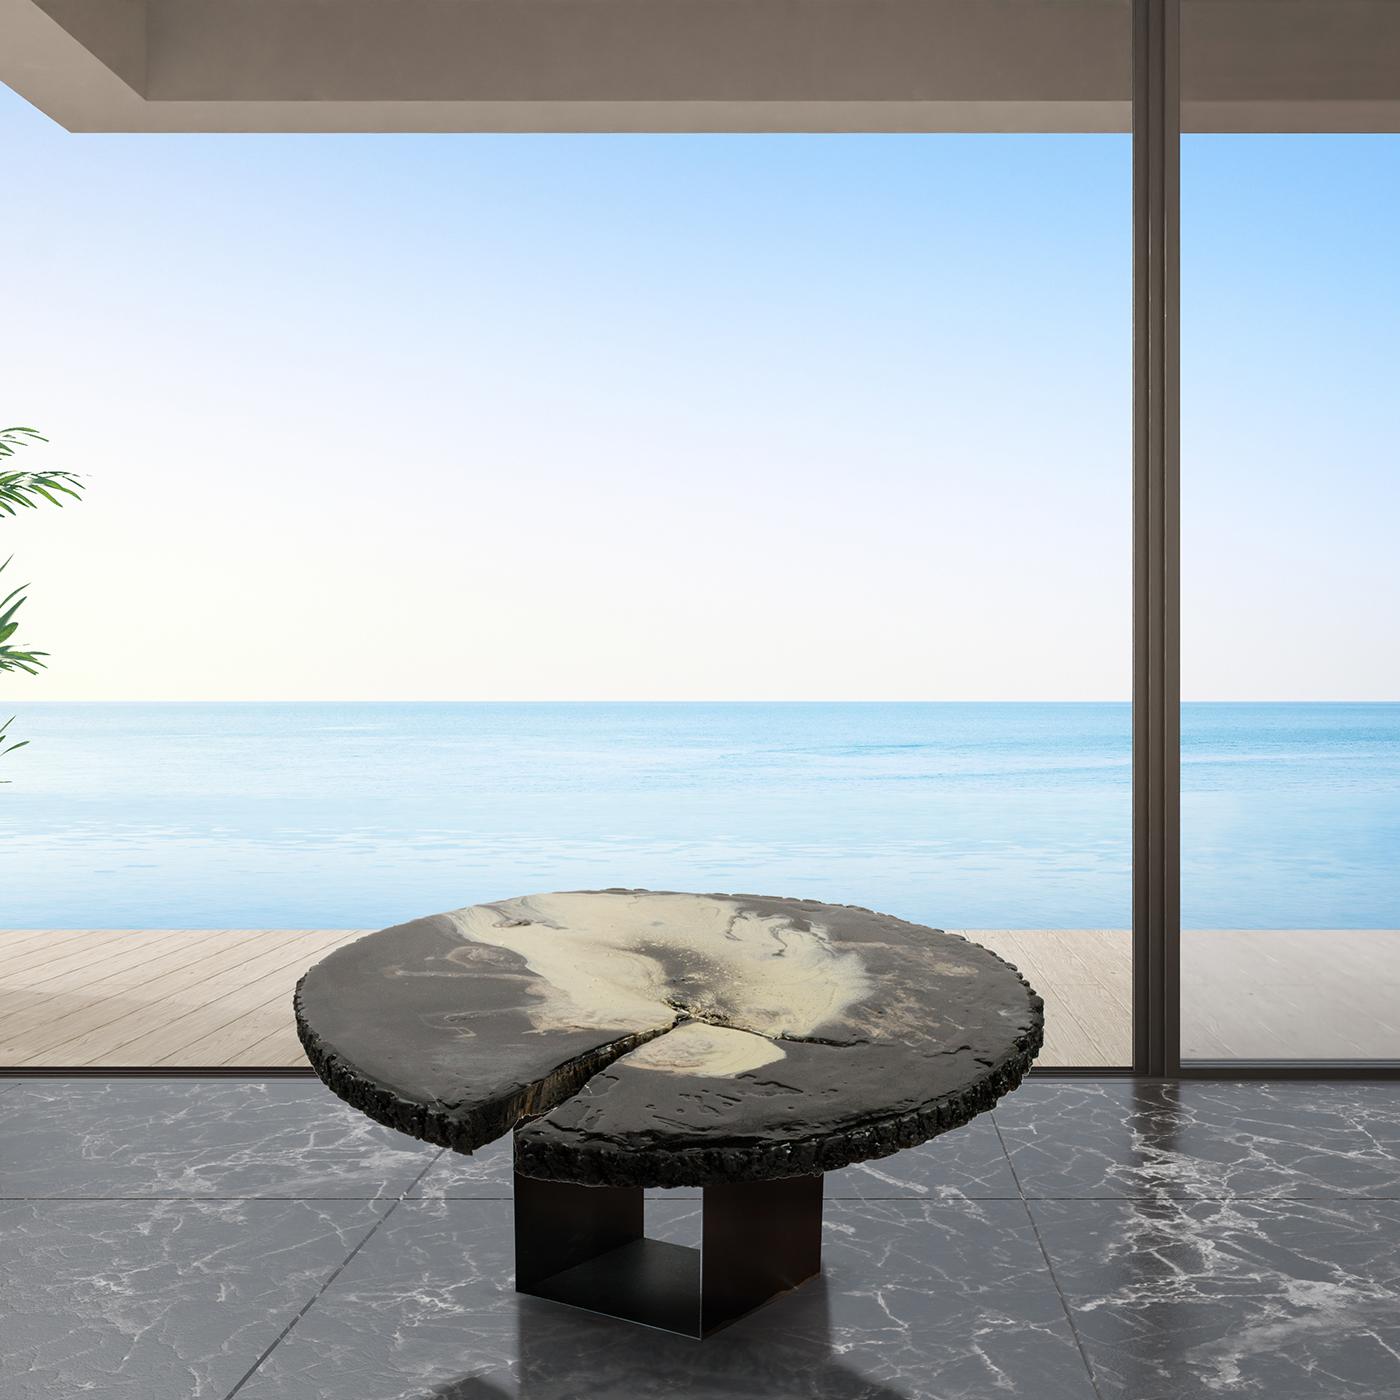 From the ROU Materiaal Nubi collection, the Nembo Lo Scuro coffee table offers otherworldly style made from organic elements. On an iron base, the table is made with a cross section of a cedar tree, worked with resins and acrylics for a unique